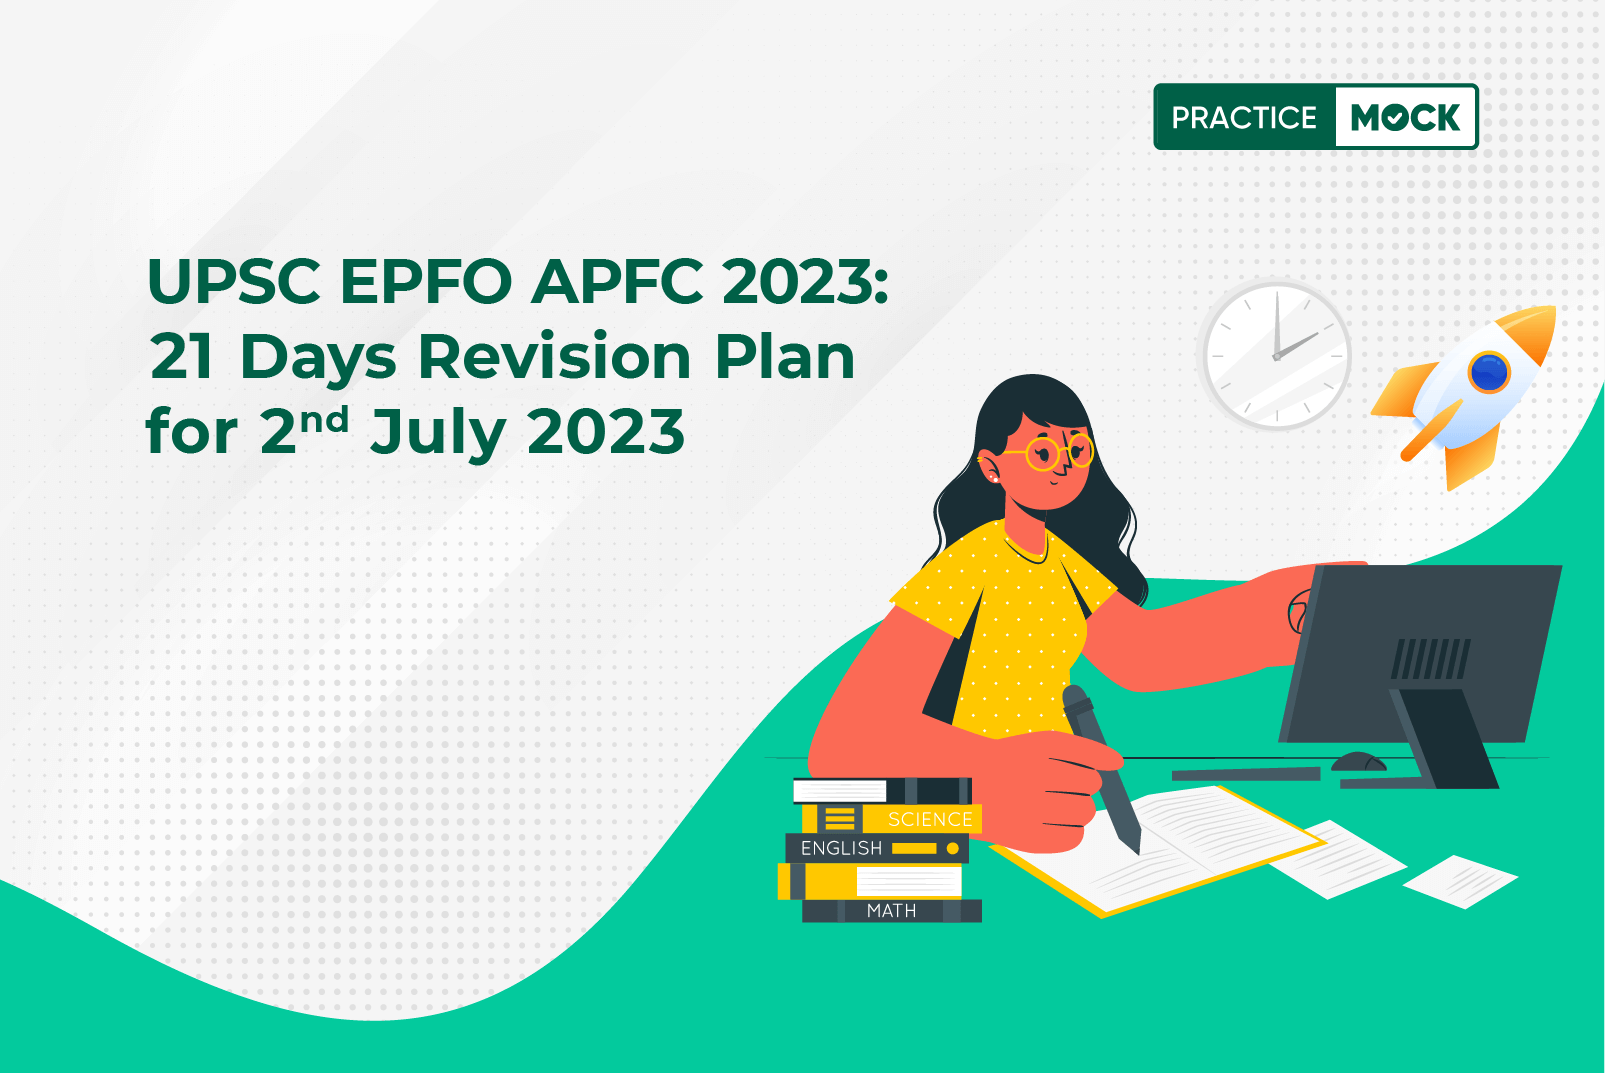 UPSC EPFO APFC 2023-21 Days Revision Plan for 2nd July 2023